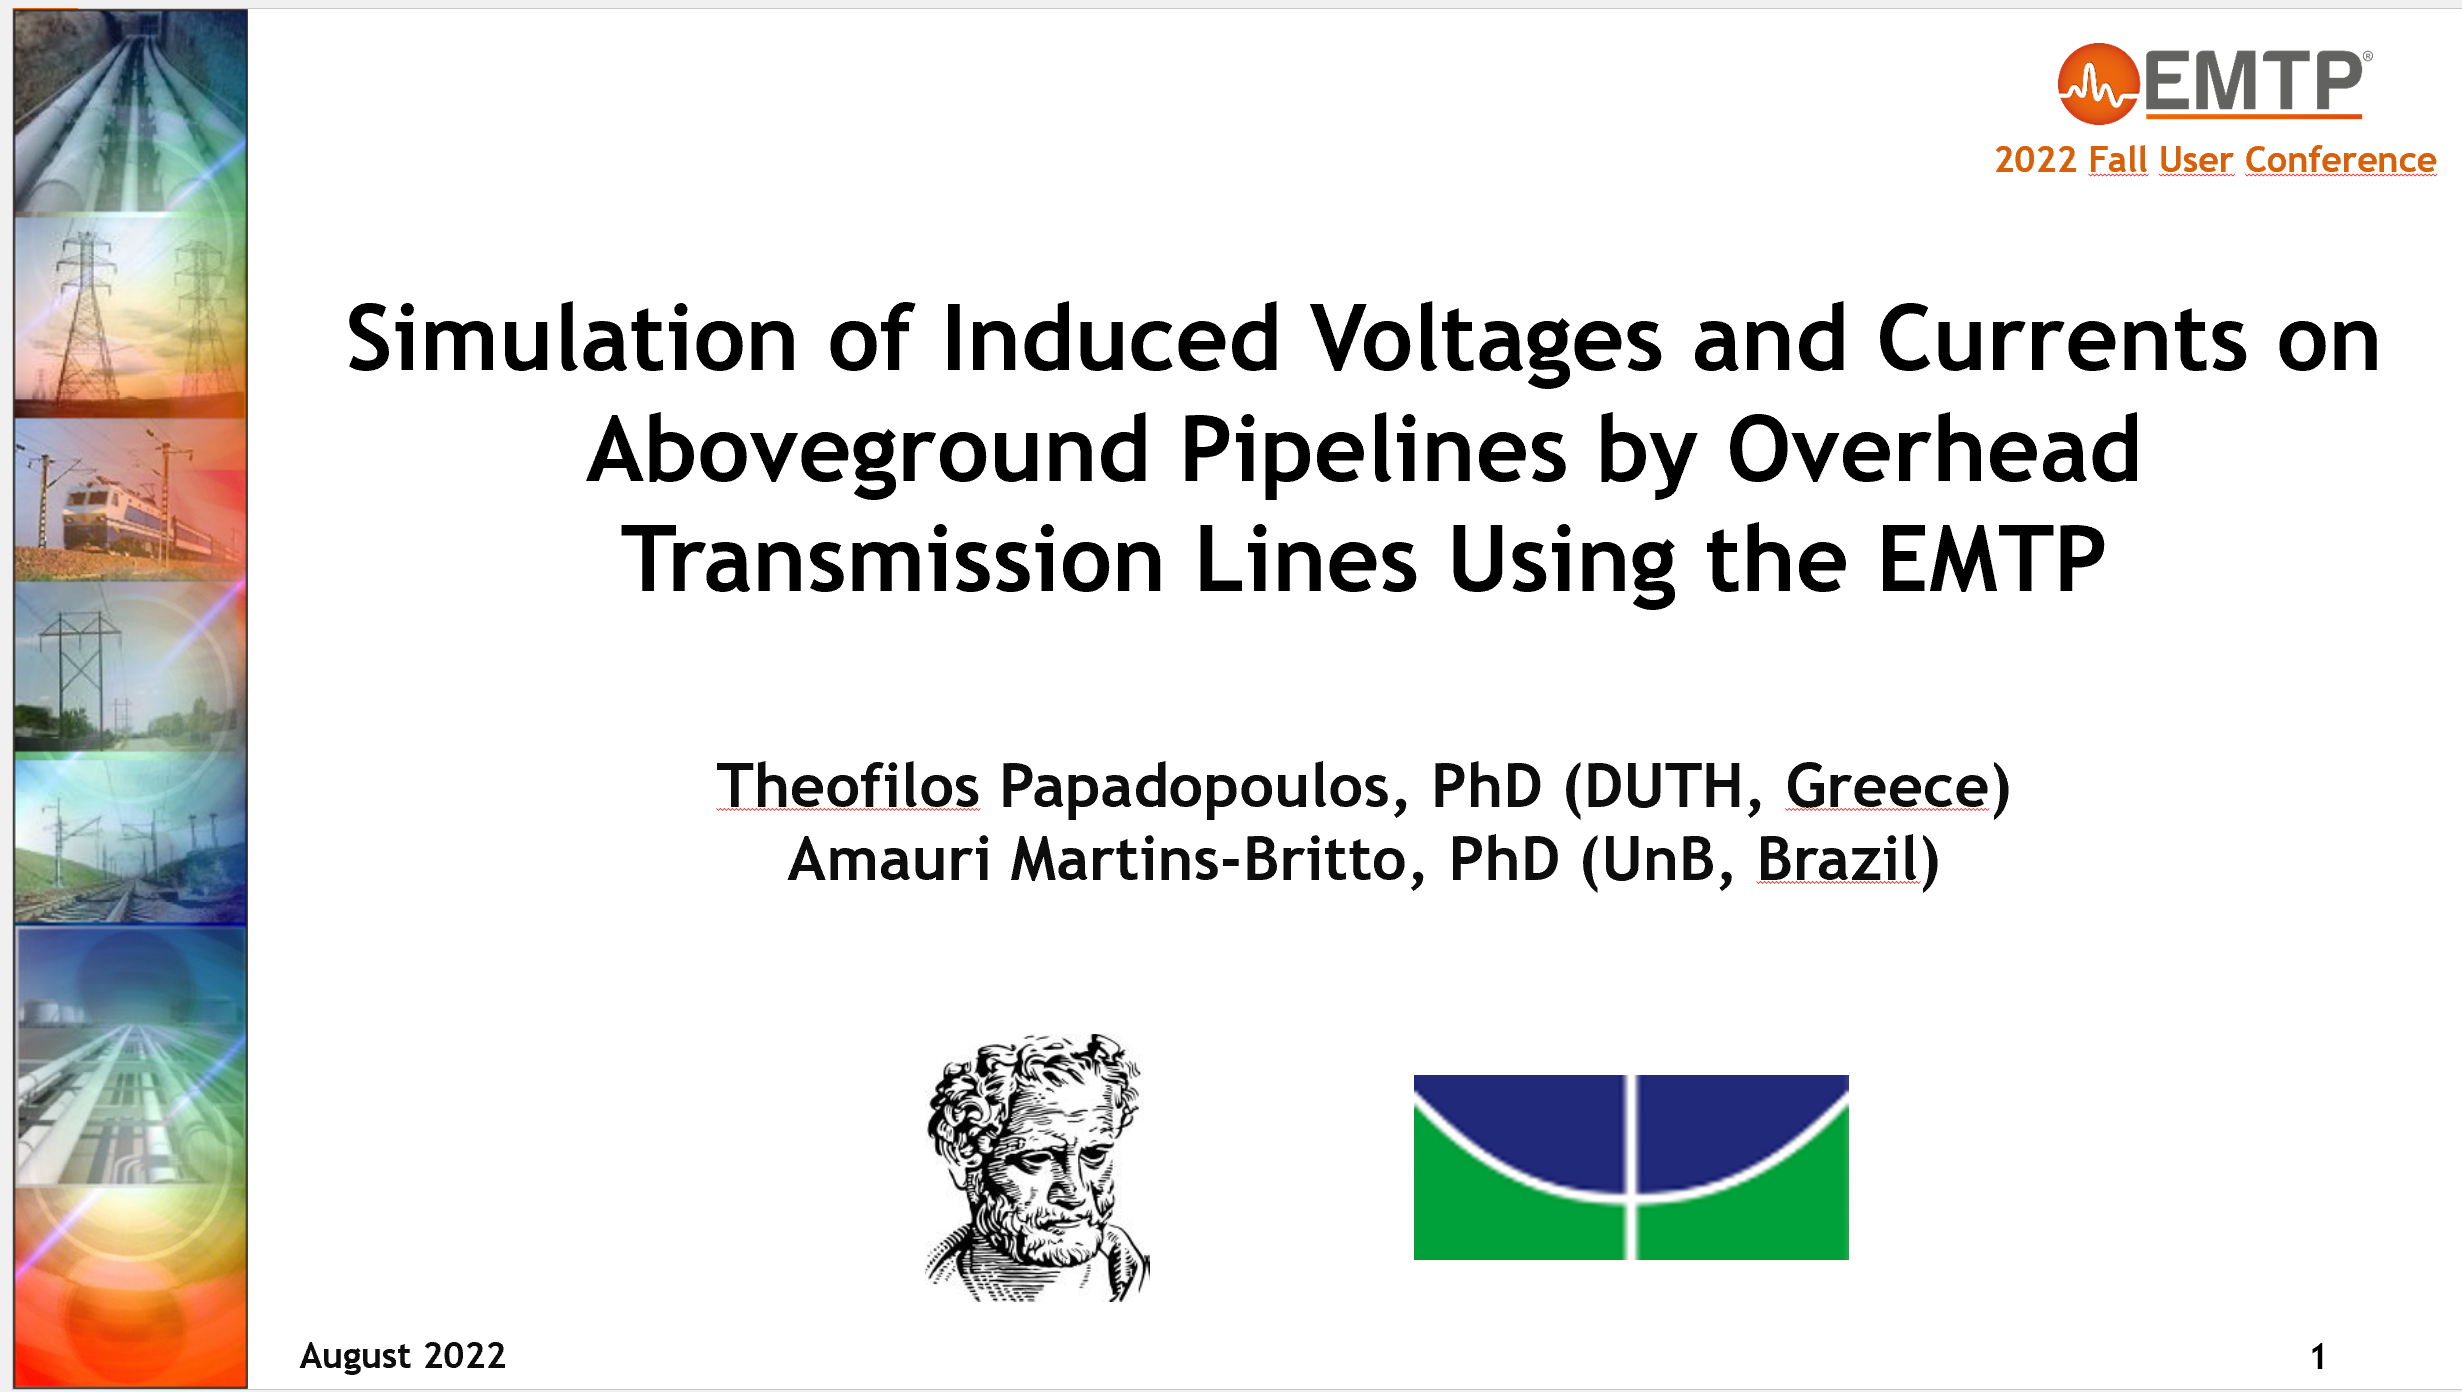 EMTP simulations of induced voltages and currents on aboveground pipelines by Overhead Transmission Lines